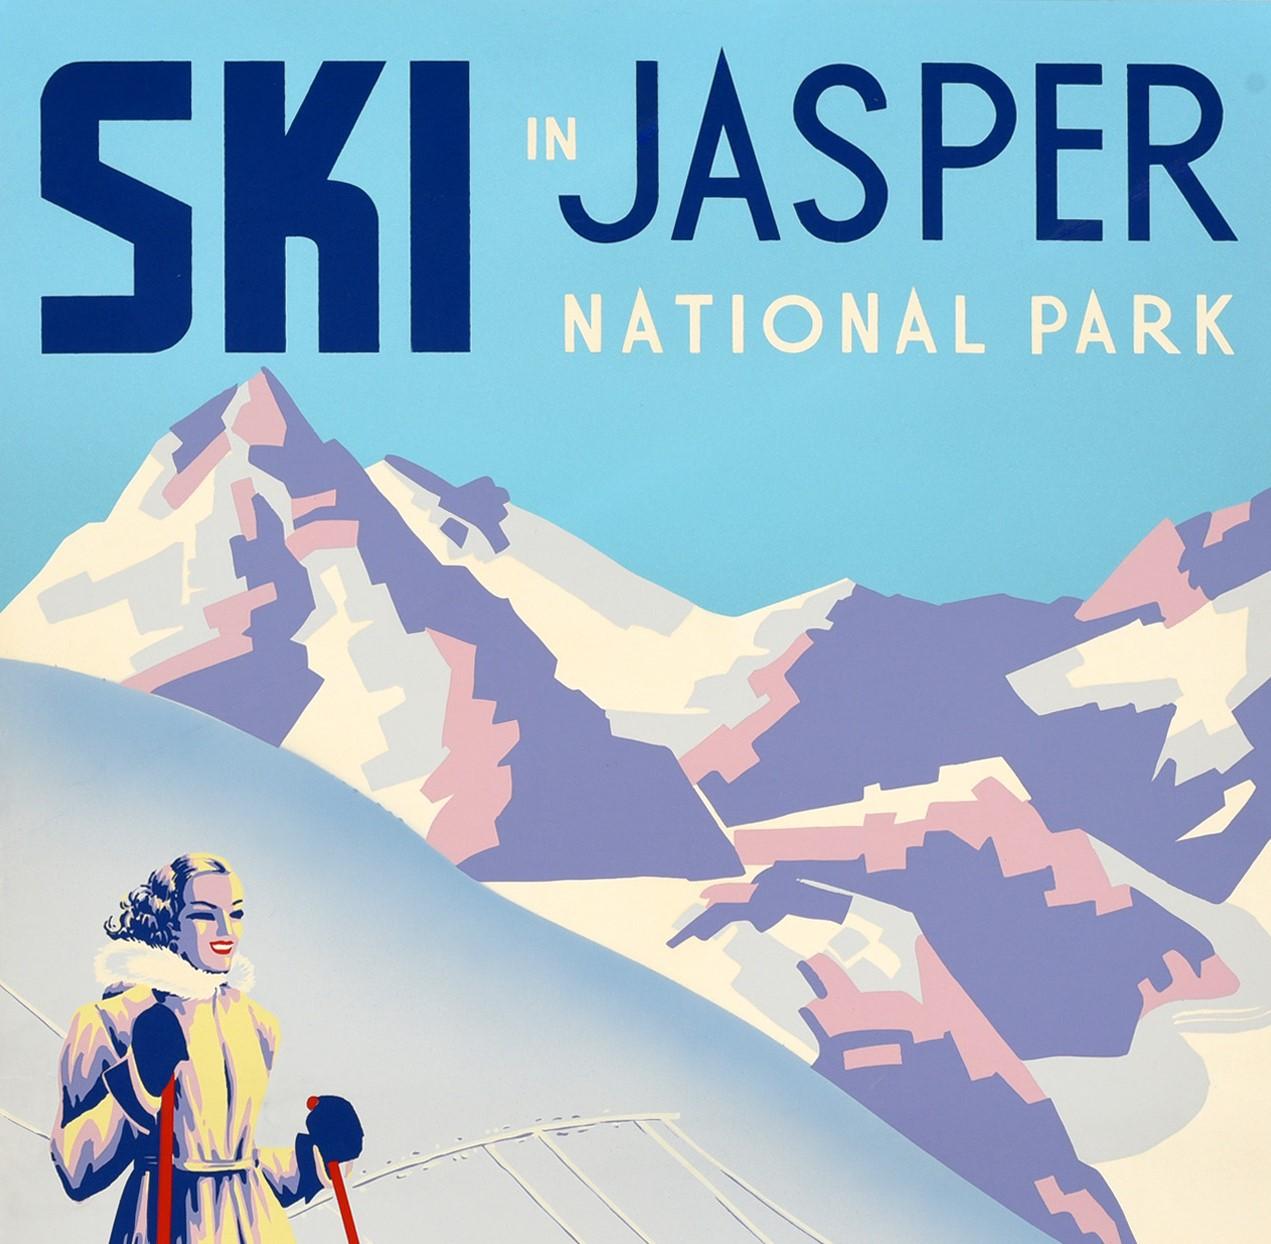 Original vintage poster - Ski in Jasper National Park Canadian National - featuring a stunning design depicting a smiling lady standing in powder snow in the foreground holding red ski poles with four skiers skiing down the mountain in the